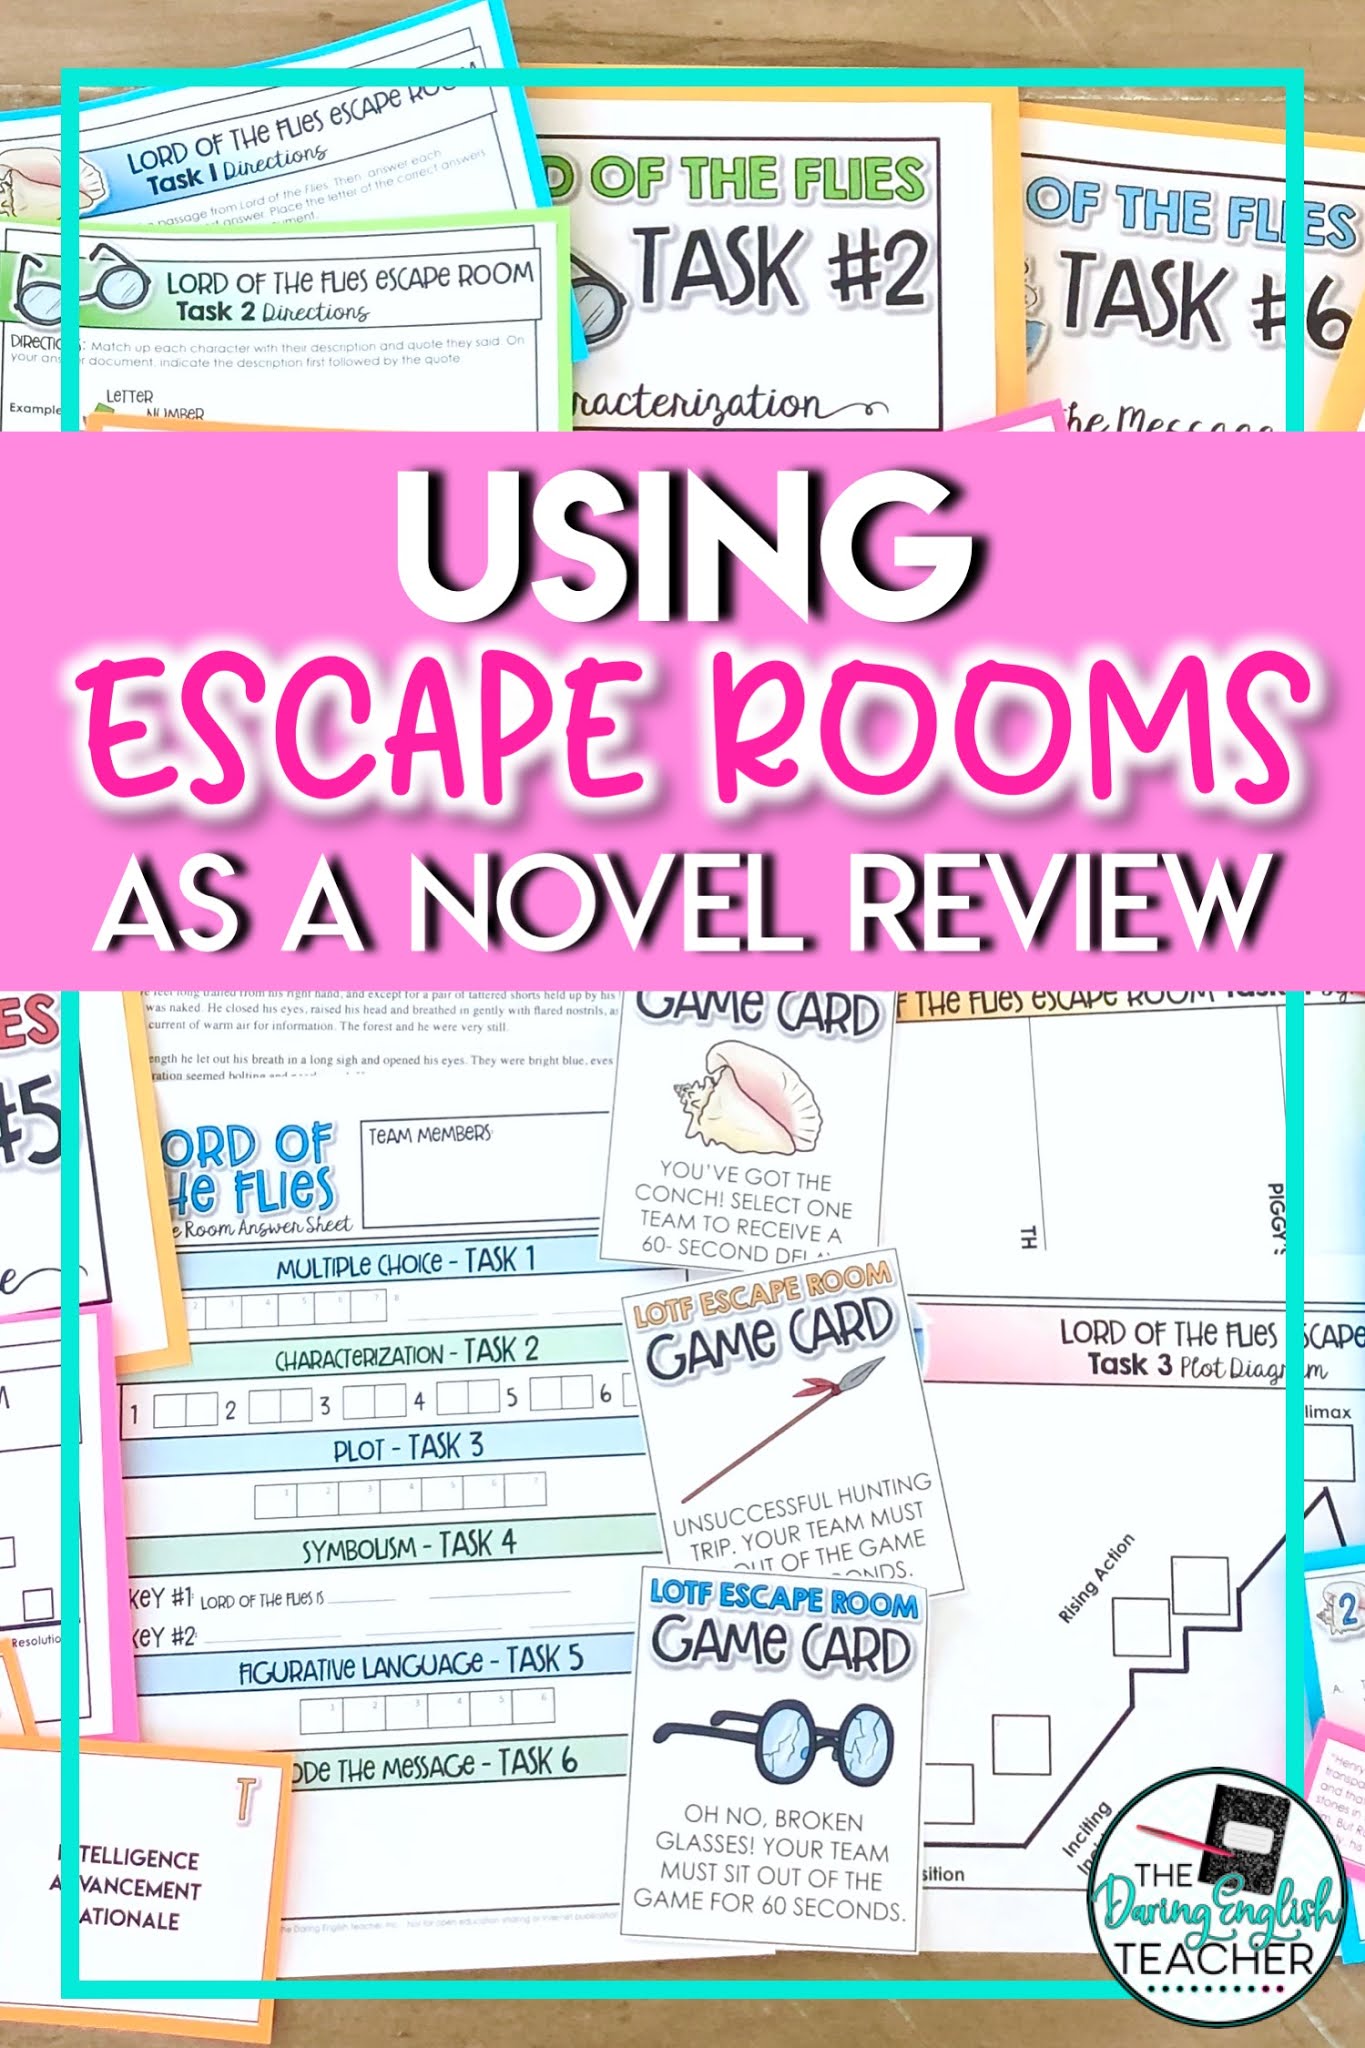 Four Ways to Incorporate Escape Rooms in the Secondary ELA Classroom